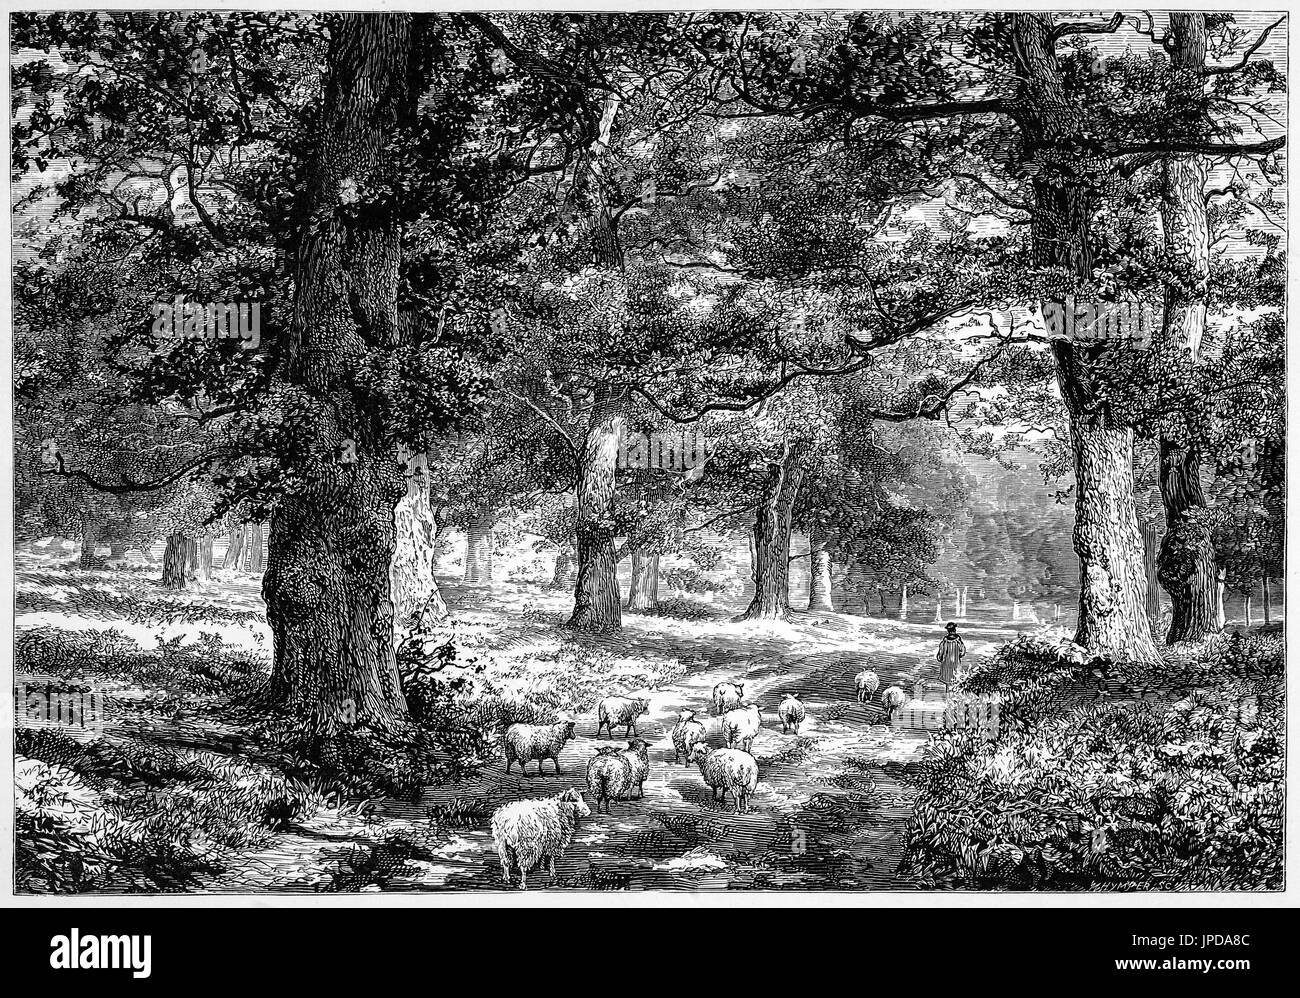 1870: Shepherd and sheep in the Royal Sherwood Forest, Nottinghamshire, England. It is famous by its historic association with the legend of Robin Hood. Stock Photo